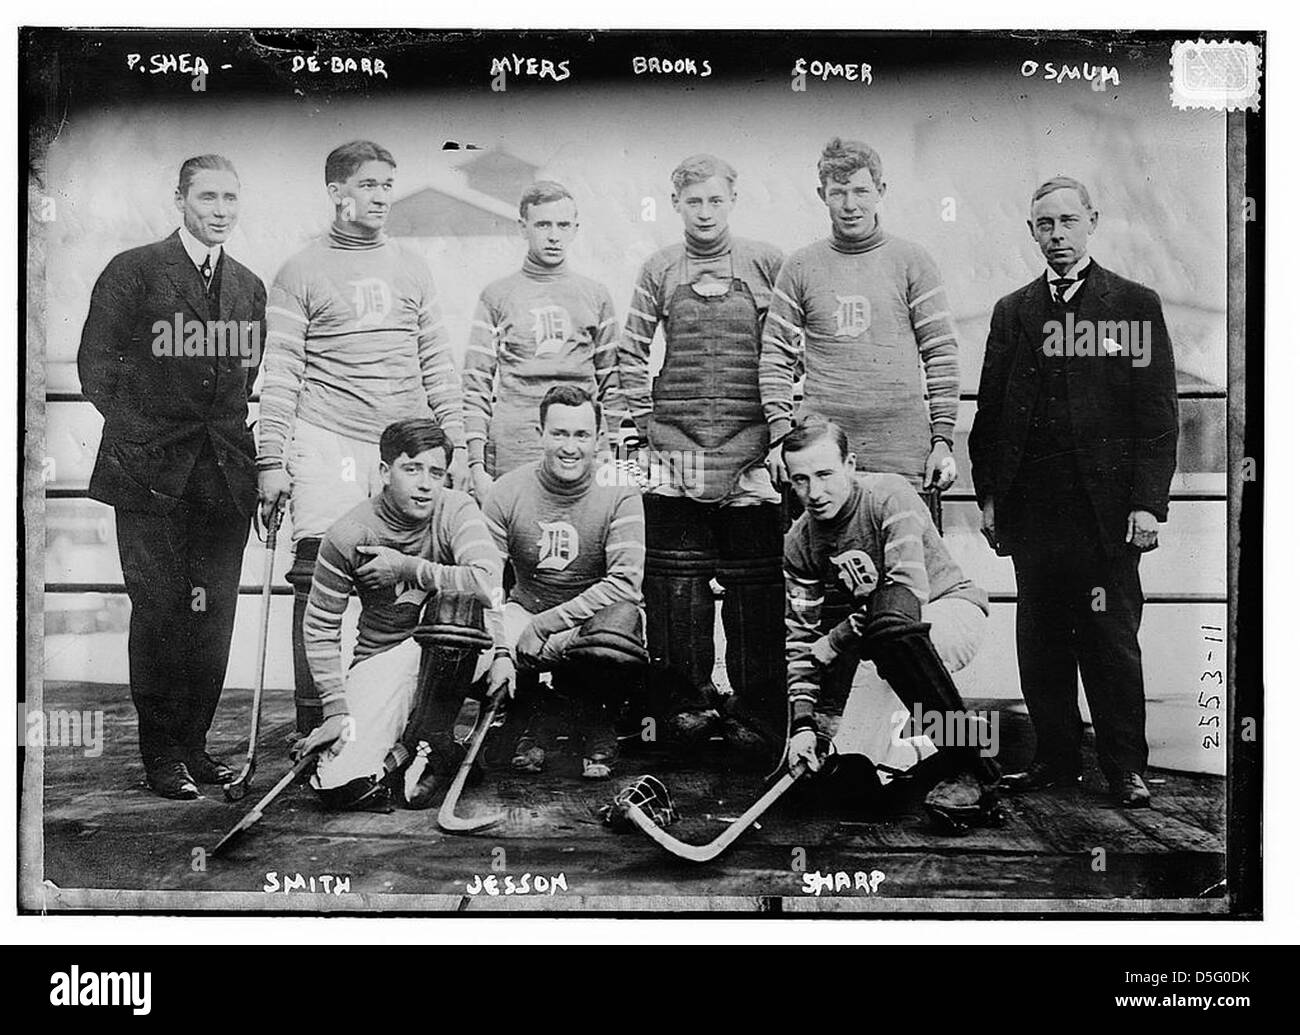 Brian smith hockey player hi-res stock photography and images - Alamy